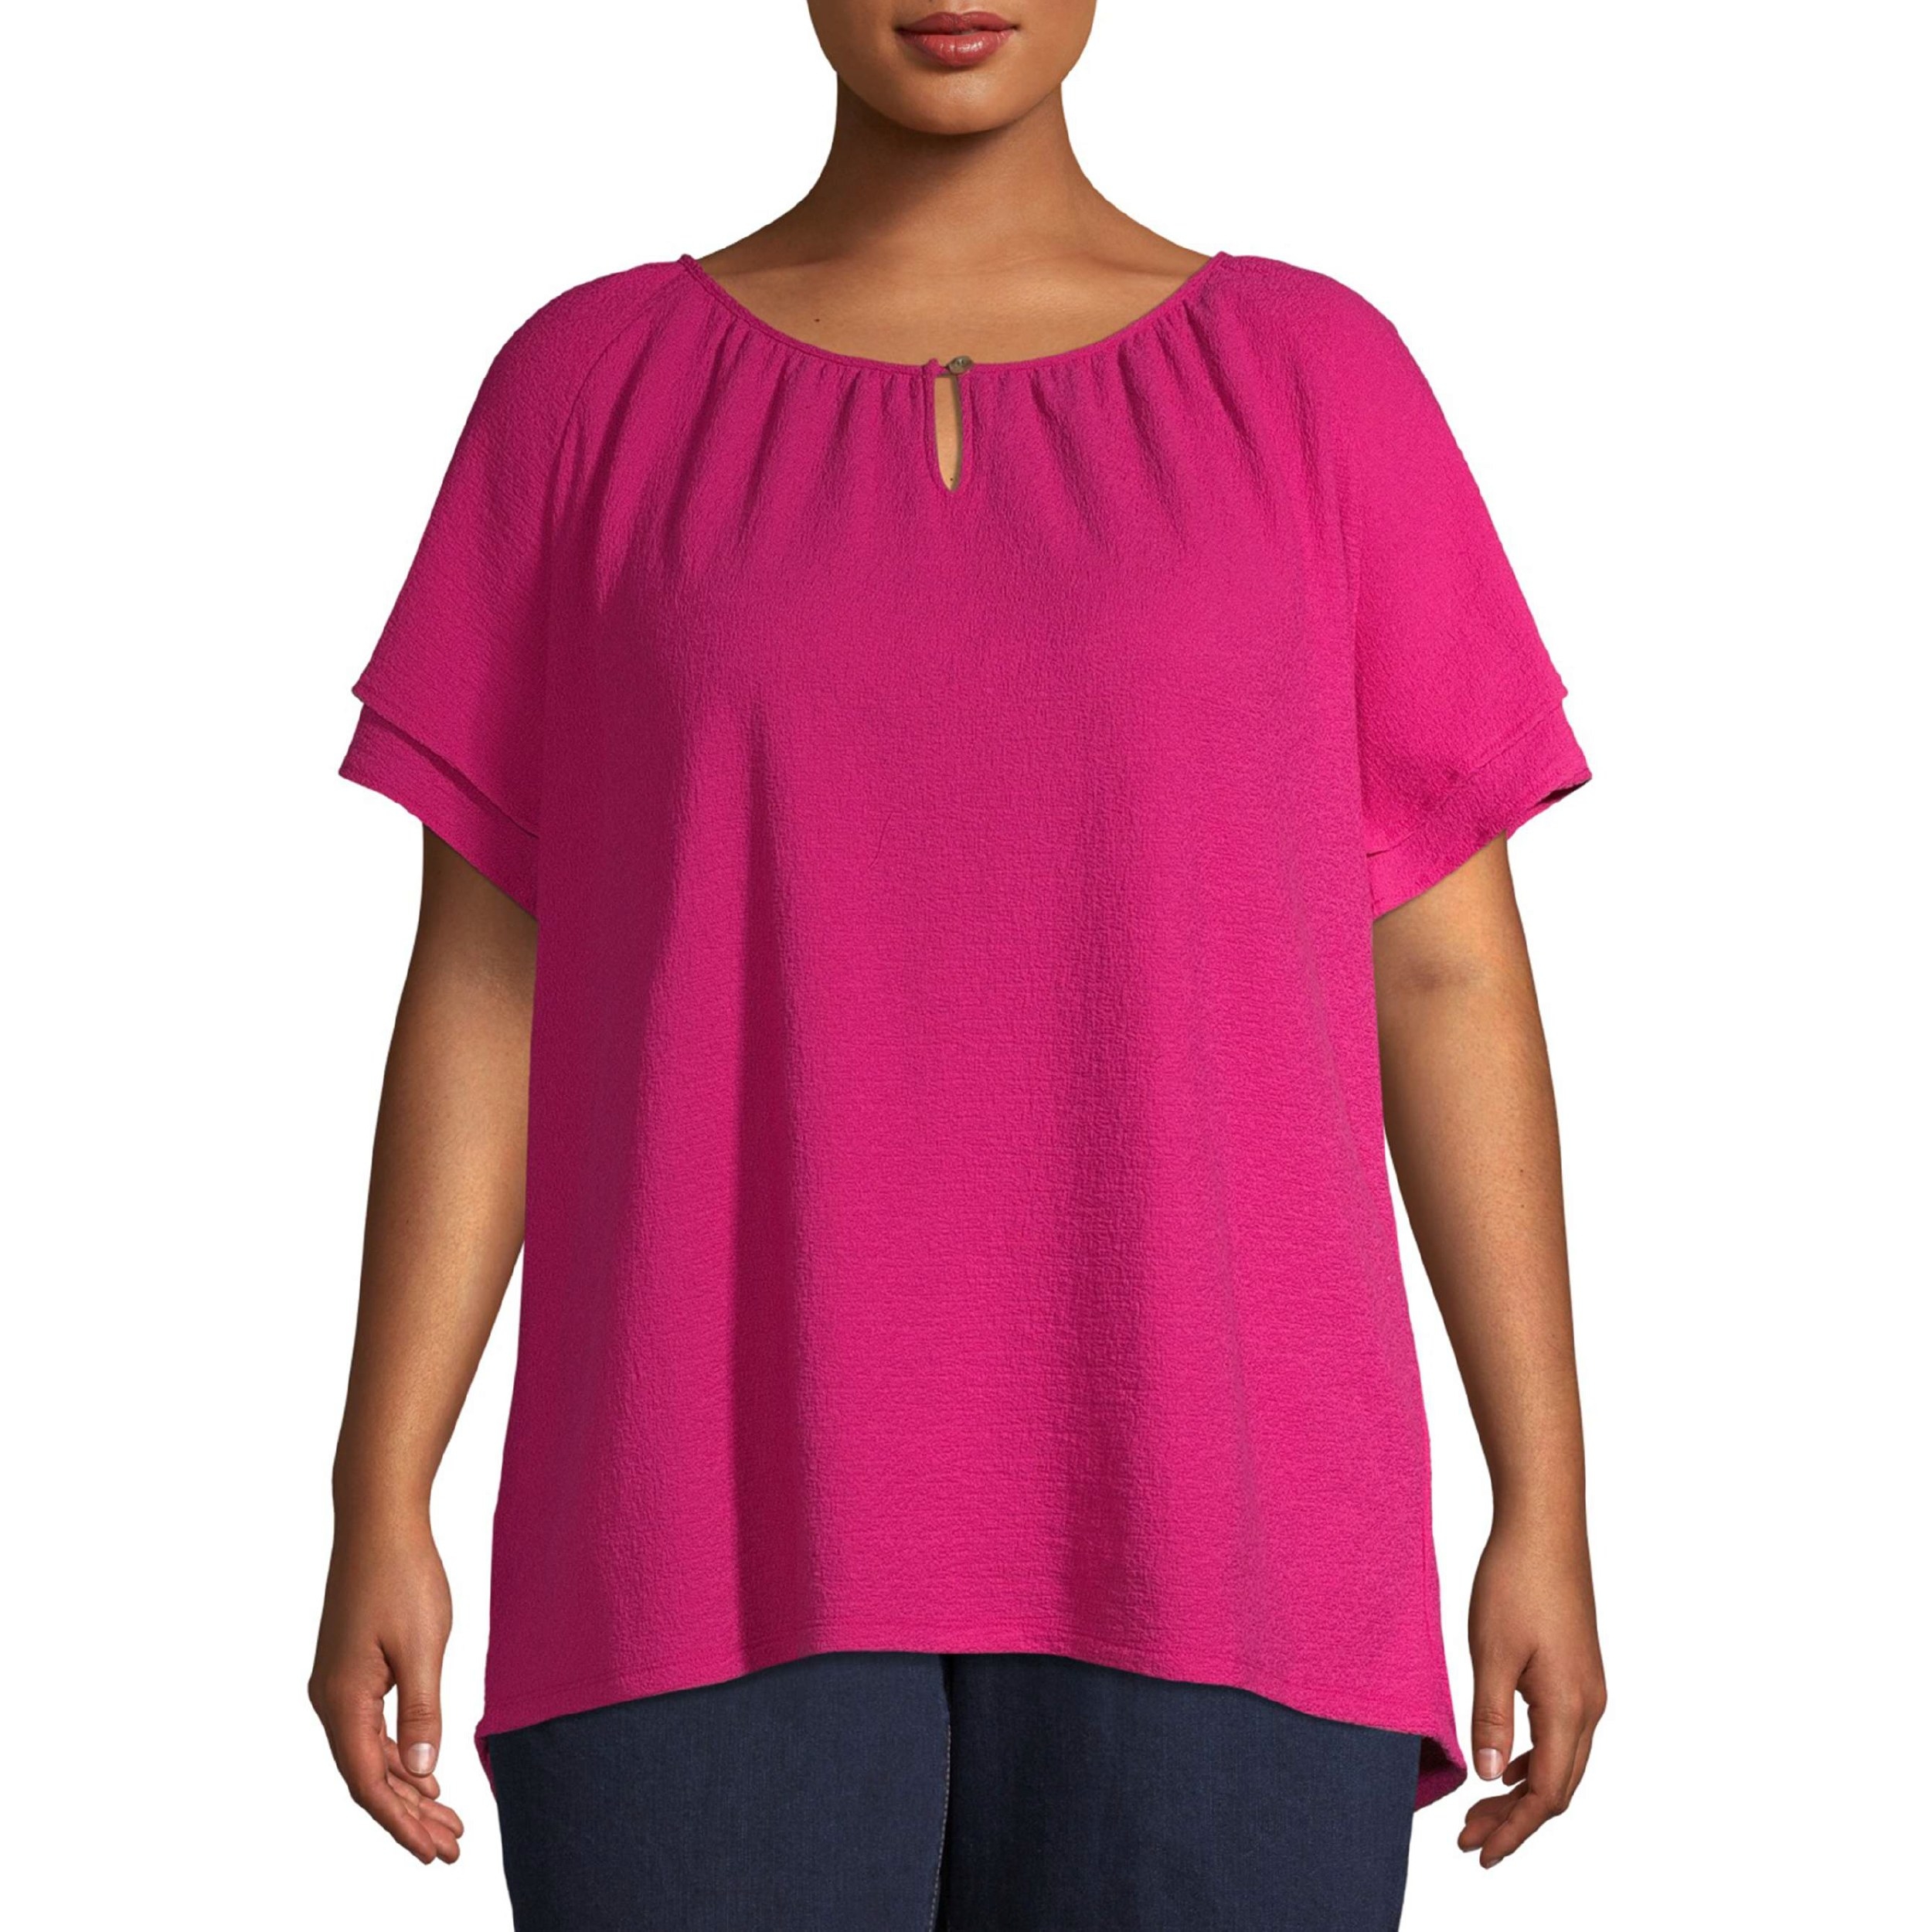 The pink tank top with eyelet neckline